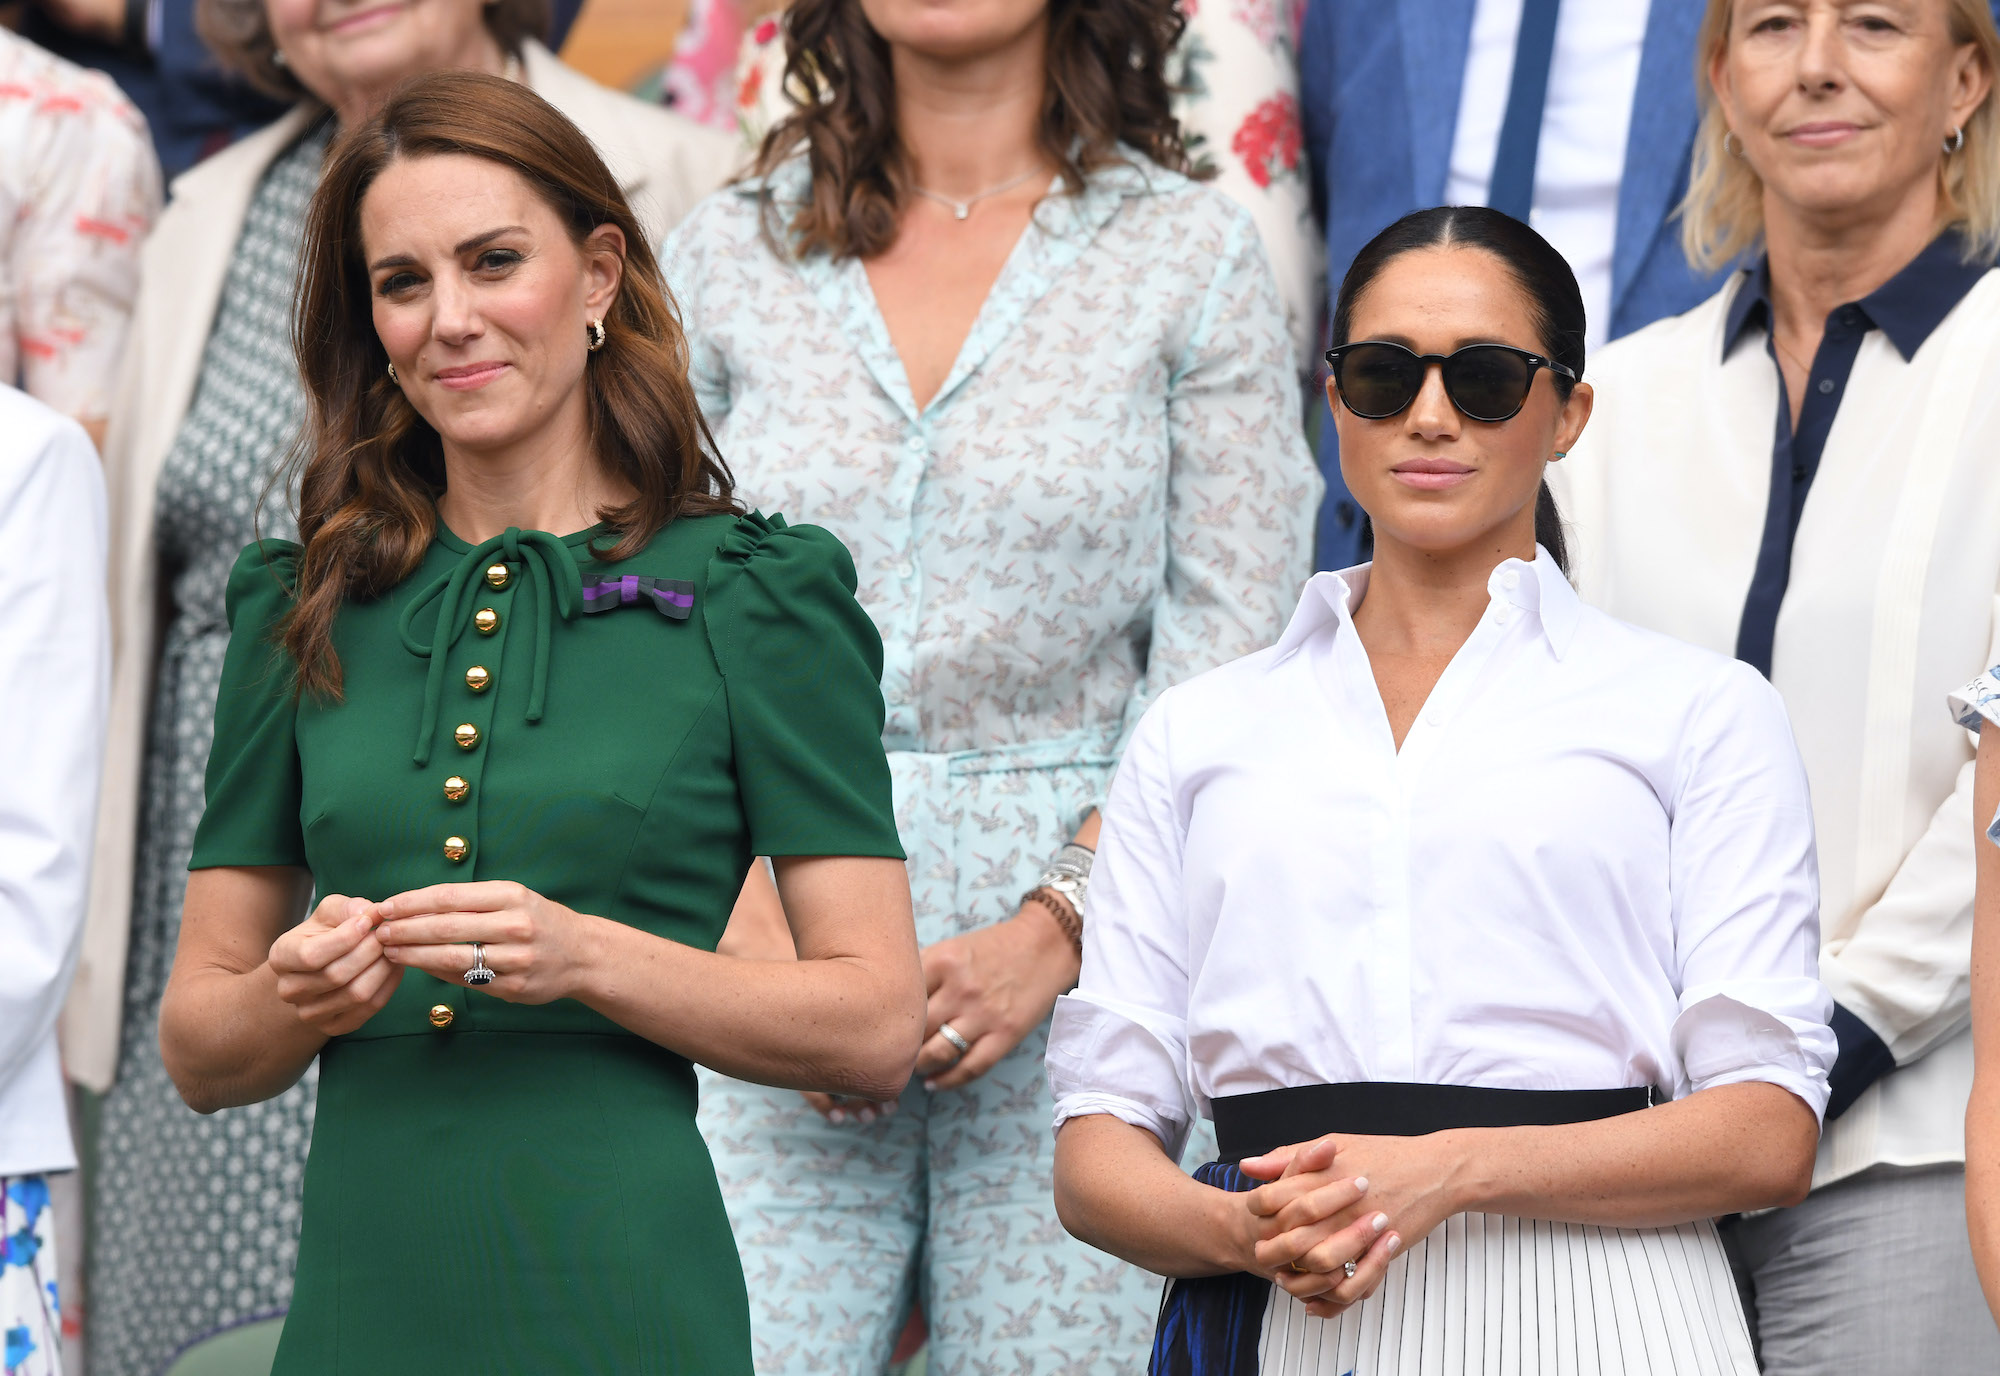 (L-R) Kate Middleton and Meghan Markle, standing in front of a crowd at a tennis match